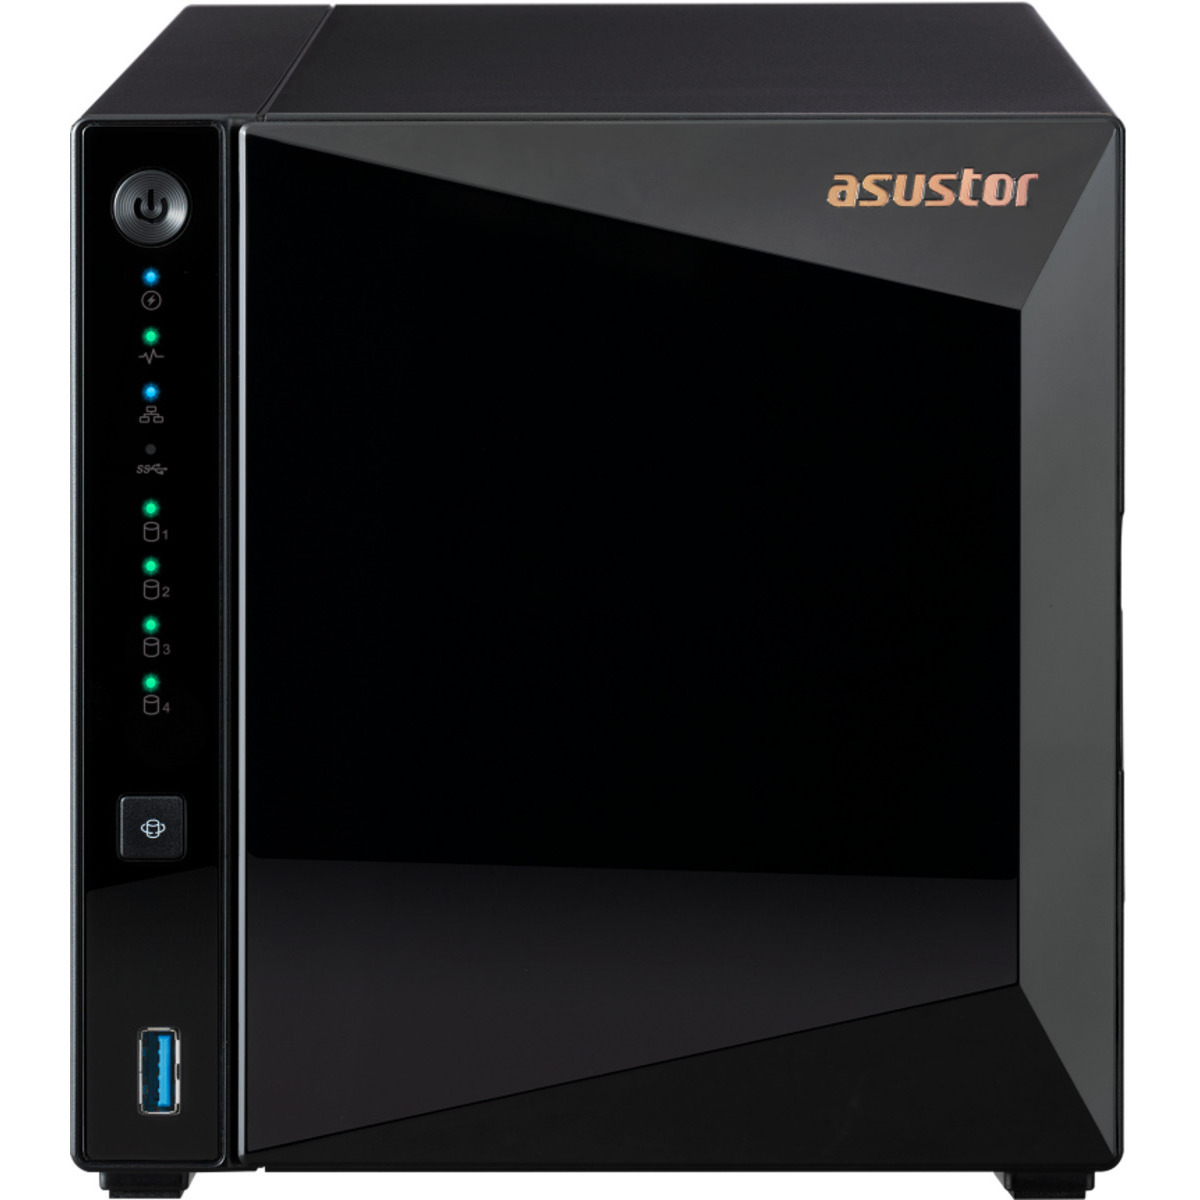 ASUSTOR DRIVESTOR 4 Pro Gen2 AS3304T v2 66tb 4-Bay Desktop Personal / Basic Home / Small Office NAS - Network Attached Storage Device 3x22tb Western Digital Ultrastar HC580 WUH722422ALE6L4 3.5 7200rpm SATA 6Gb/s HDD ENTERPRISE Class Drives Installed - Burn-In Tested - ON SALE DRIVESTOR 4 Pro Gen2 AS3304T v2